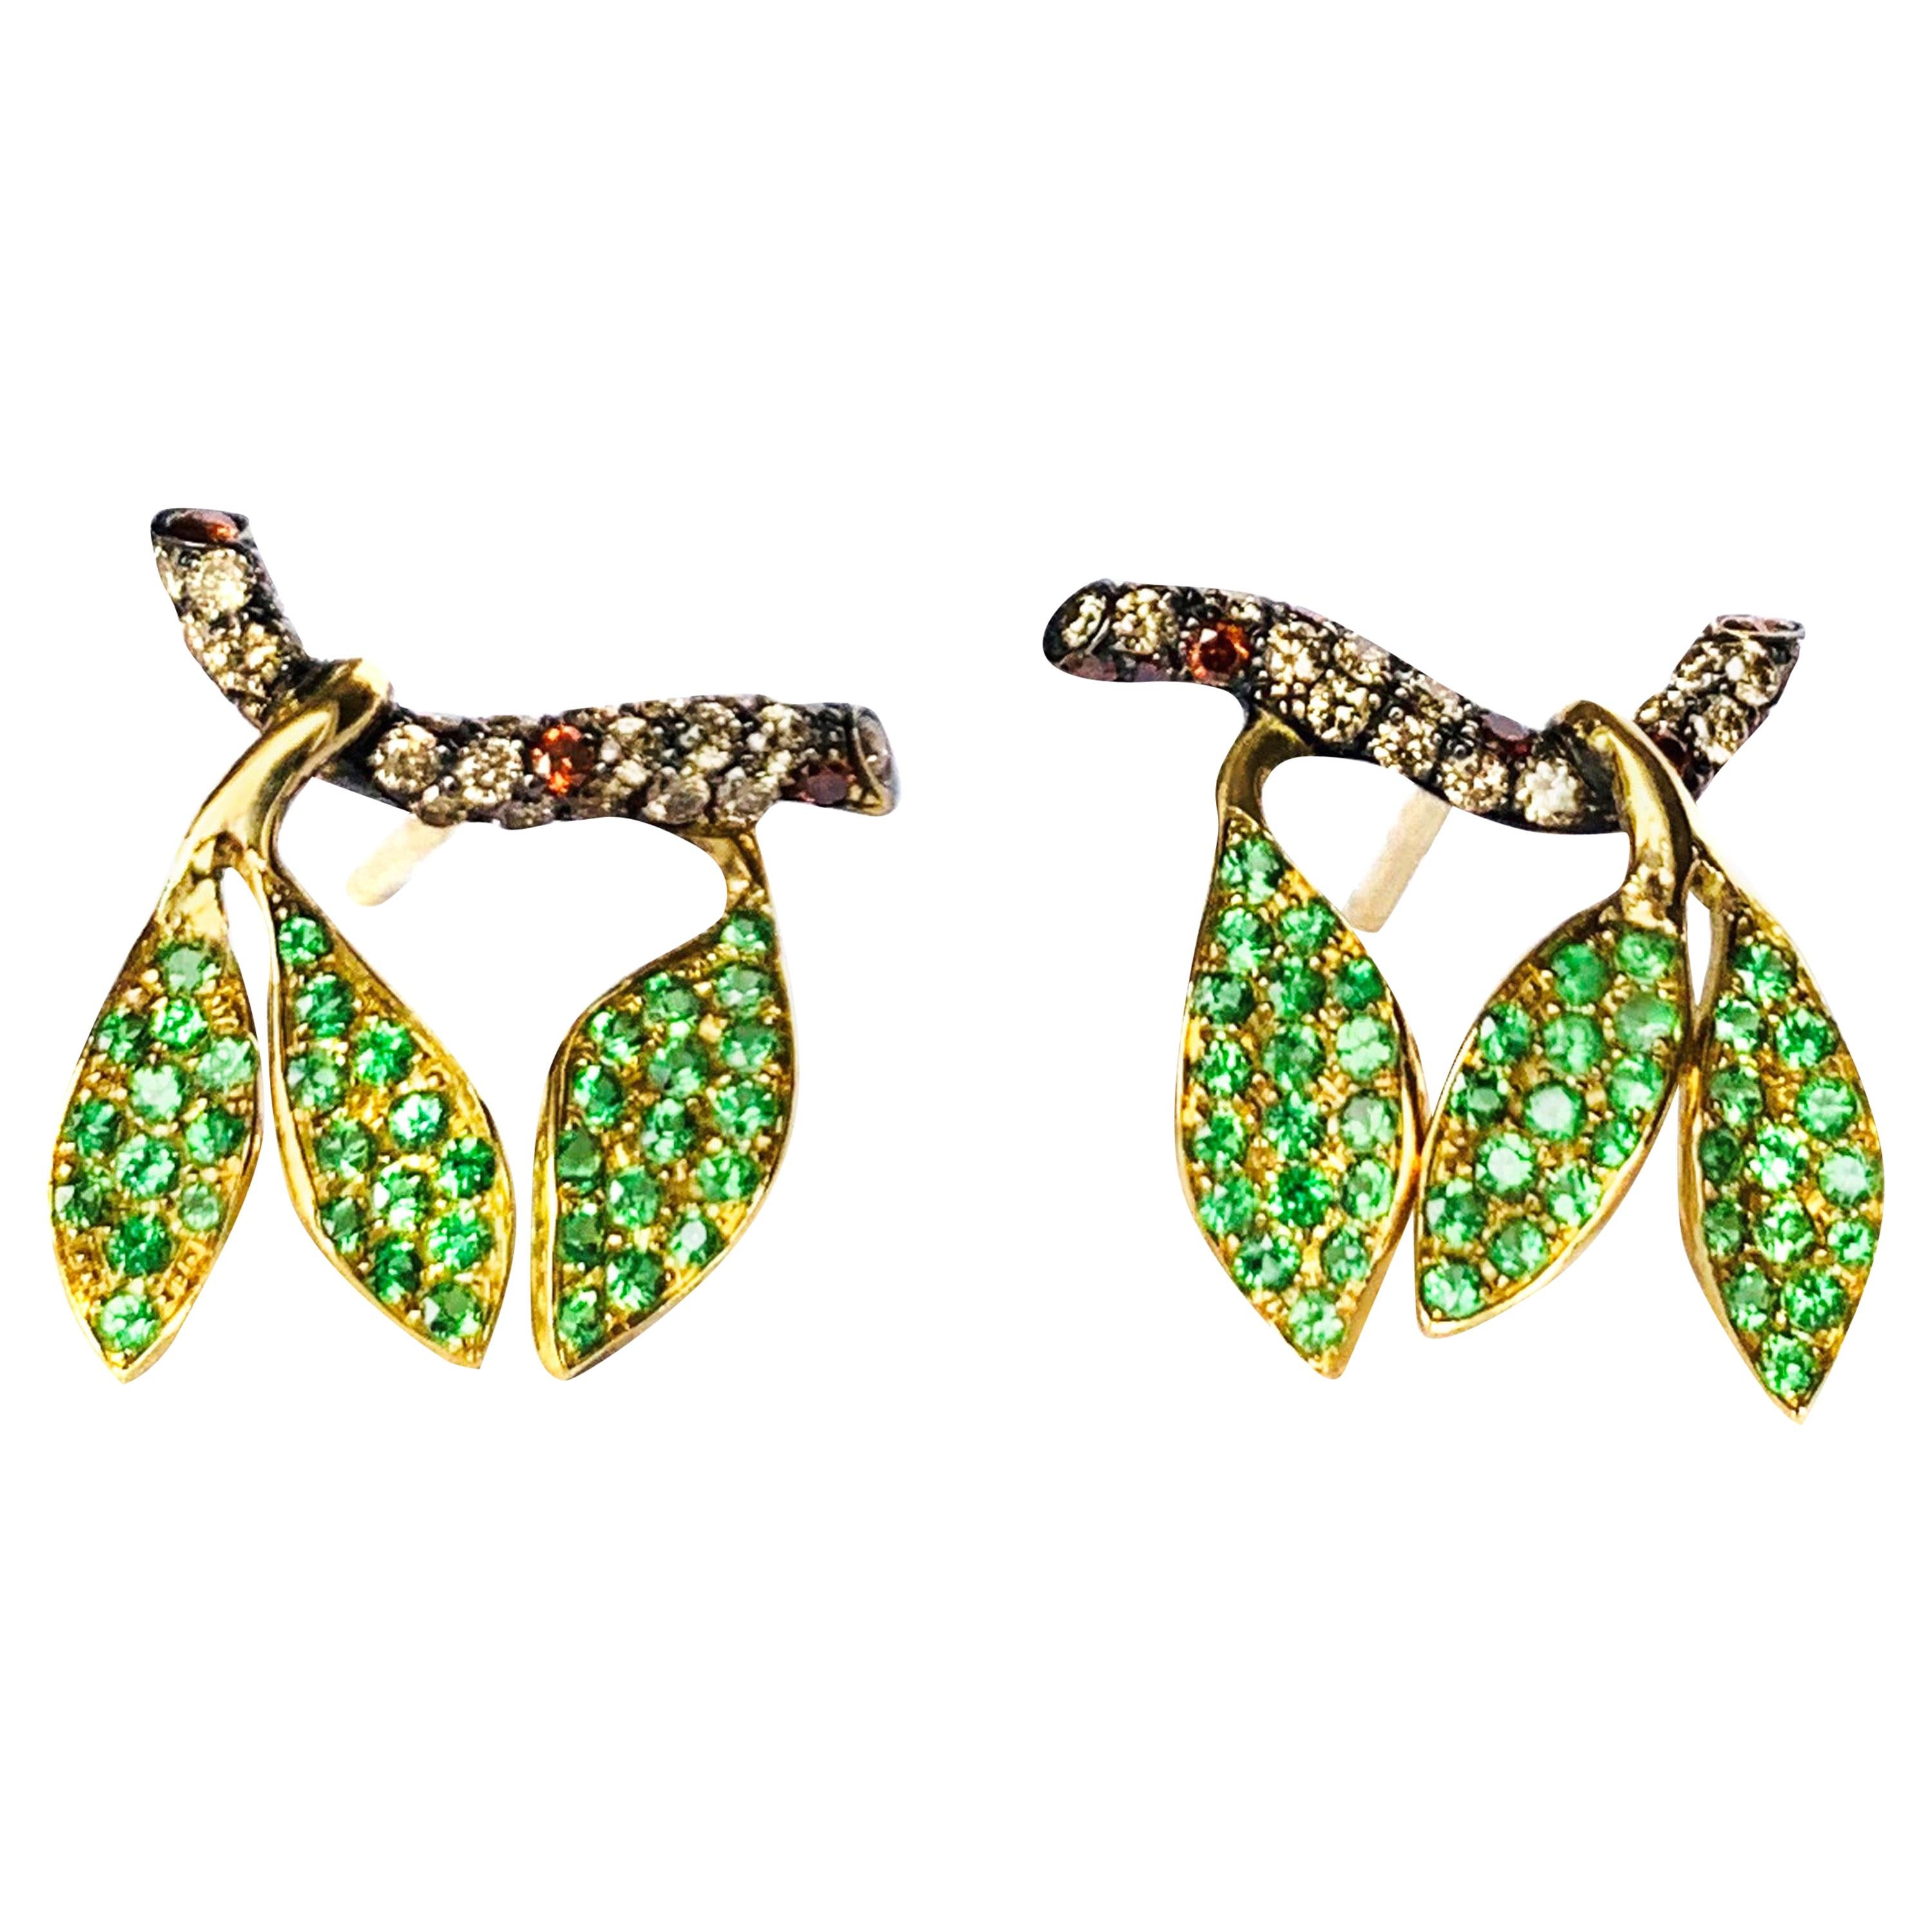 Contemporary Diamond and Tsavorite Stud Earrings in Yellow Gold